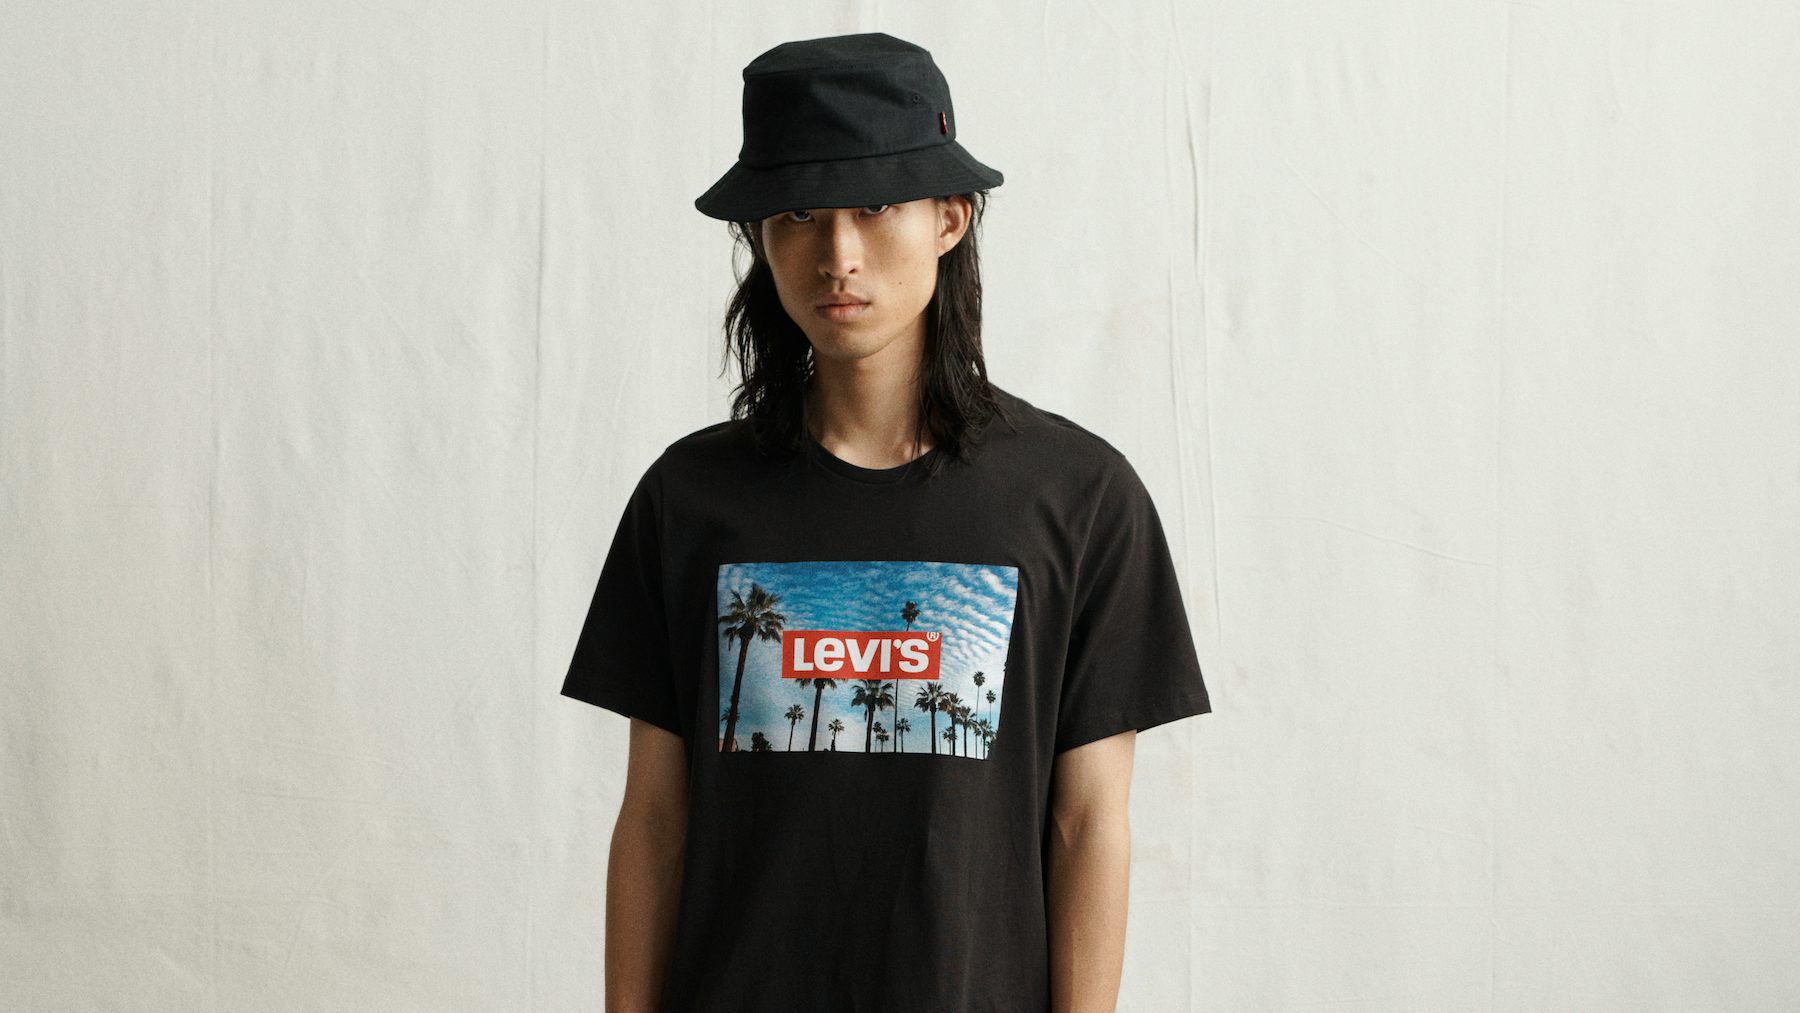 levis branded shirts